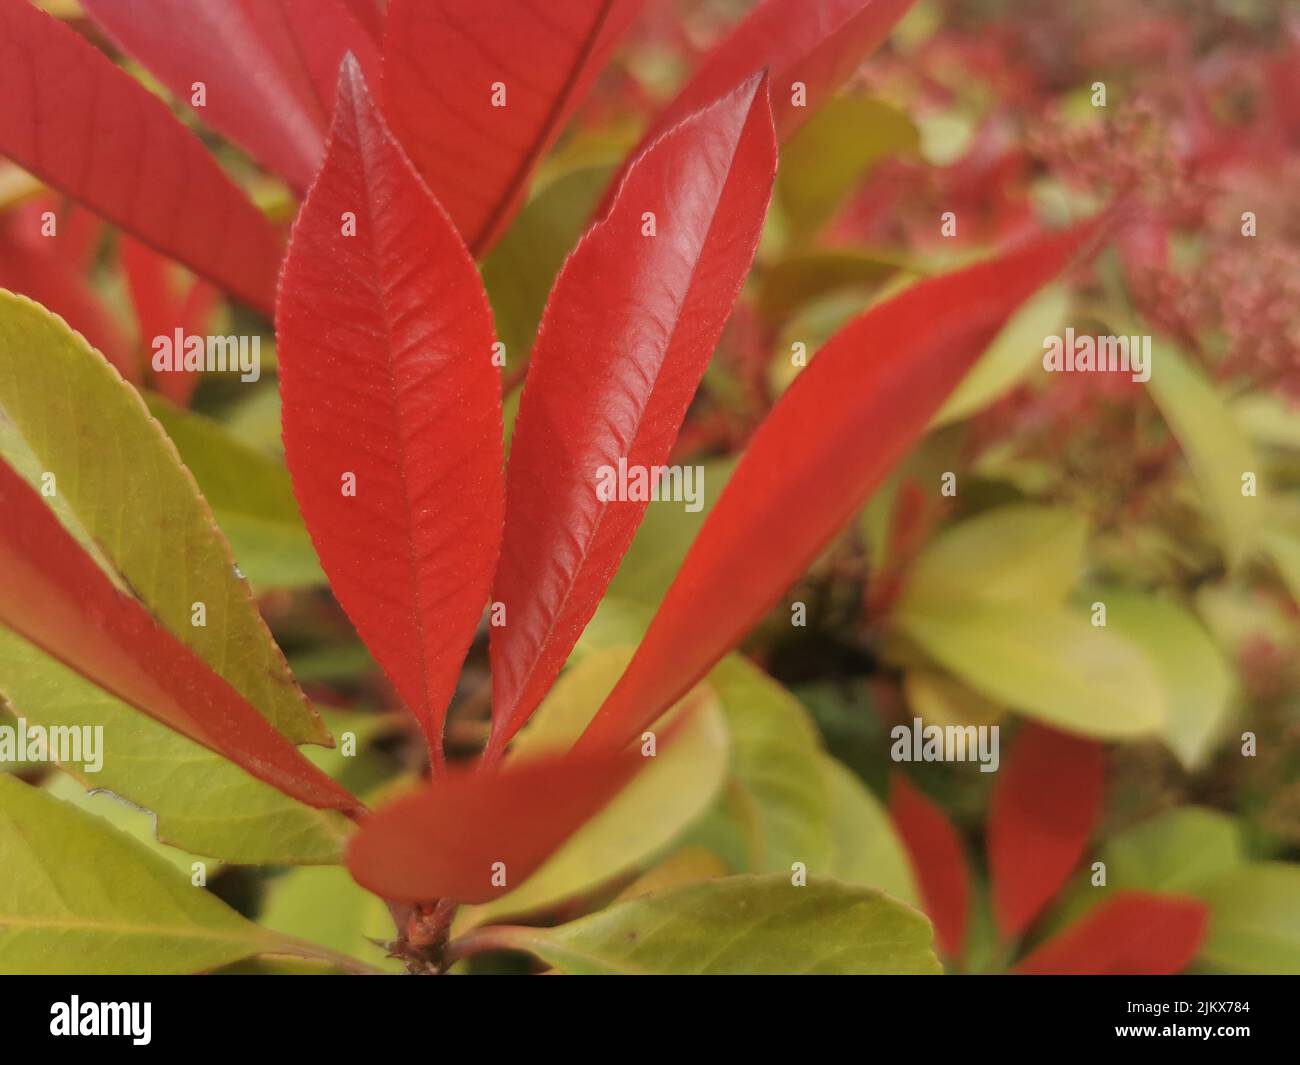 A closeup of long red leaves growing against green plants Stock Photo